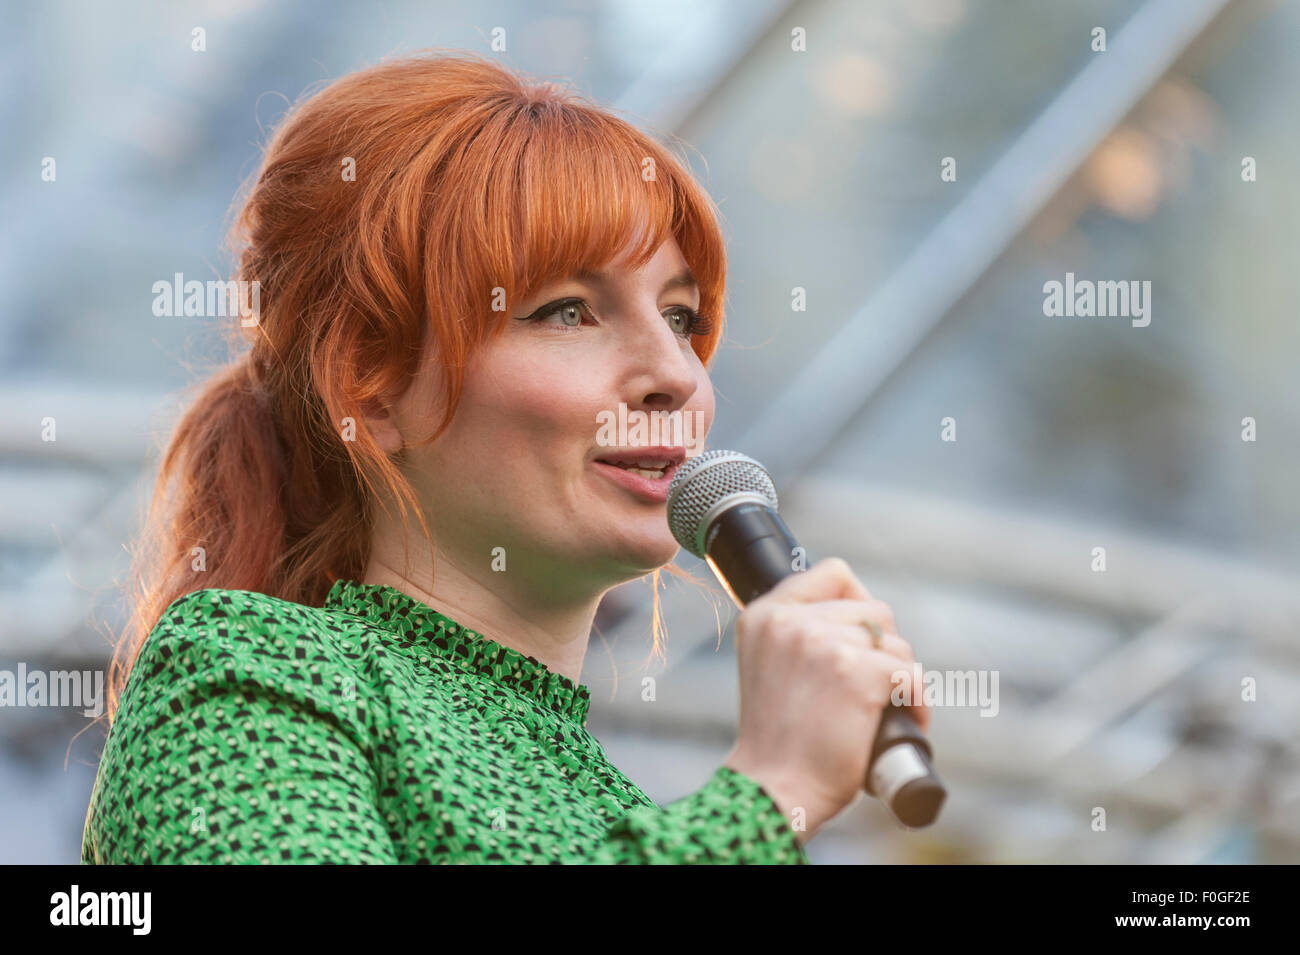 London, UK. 15 August 2015. BBC Radio 1's Alice Levine introduces on stage at Spotlight, the one day, open-air music, and comedy festival, in Dials, Covent Garden. Credit: Stephen